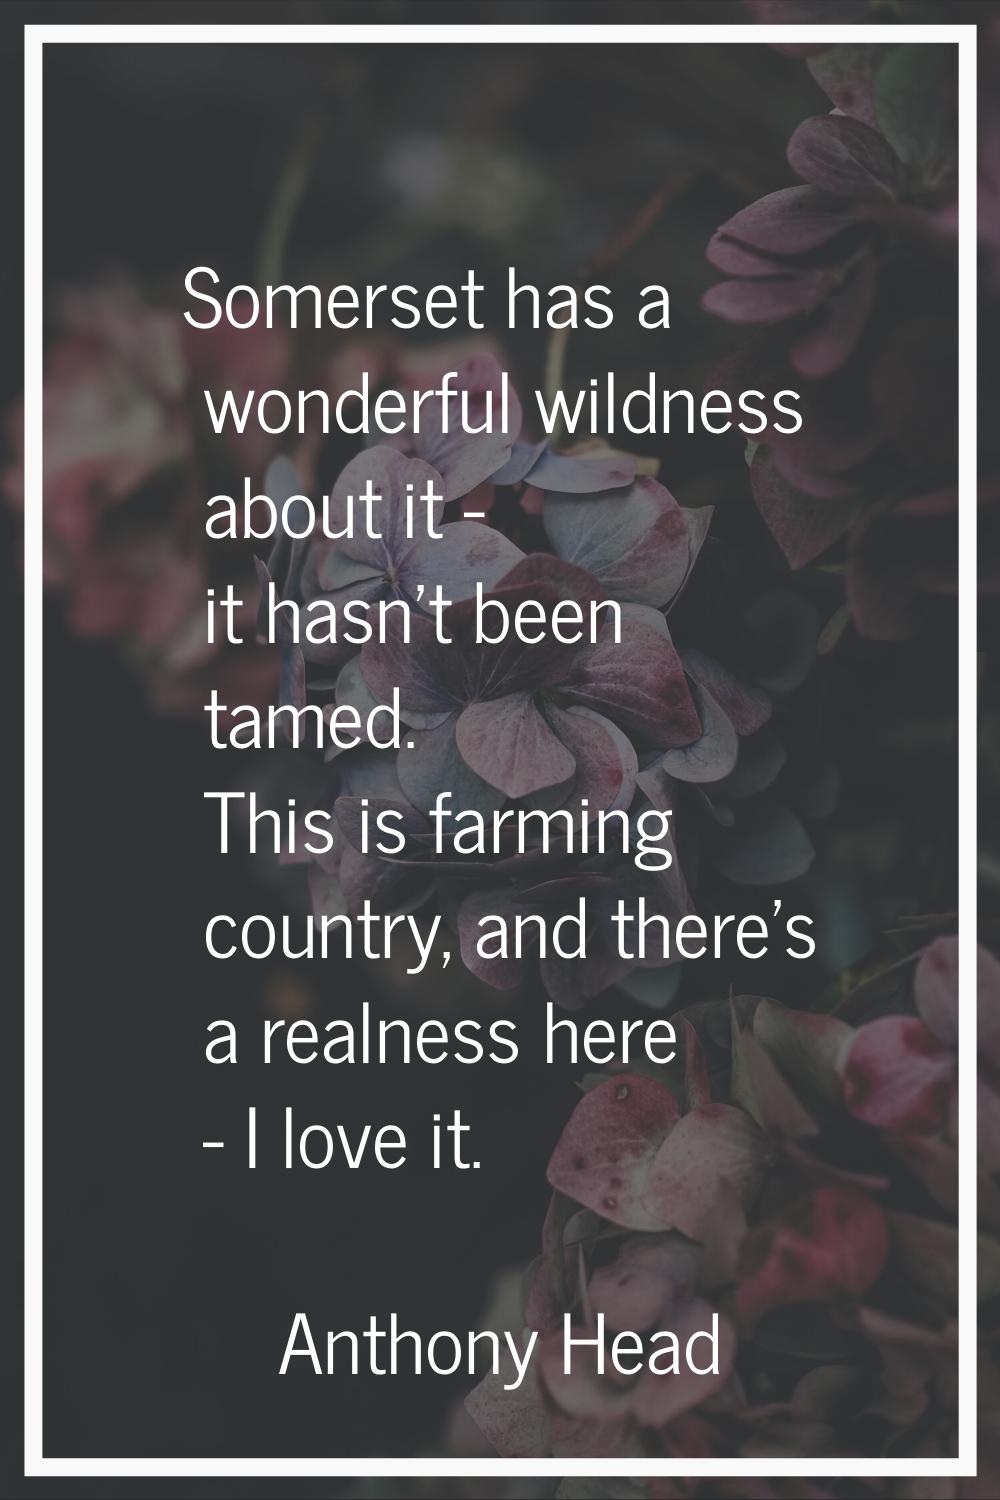 Somerset has a wonderful wildness about it - it hasn't been tamed. This is farming country, and the